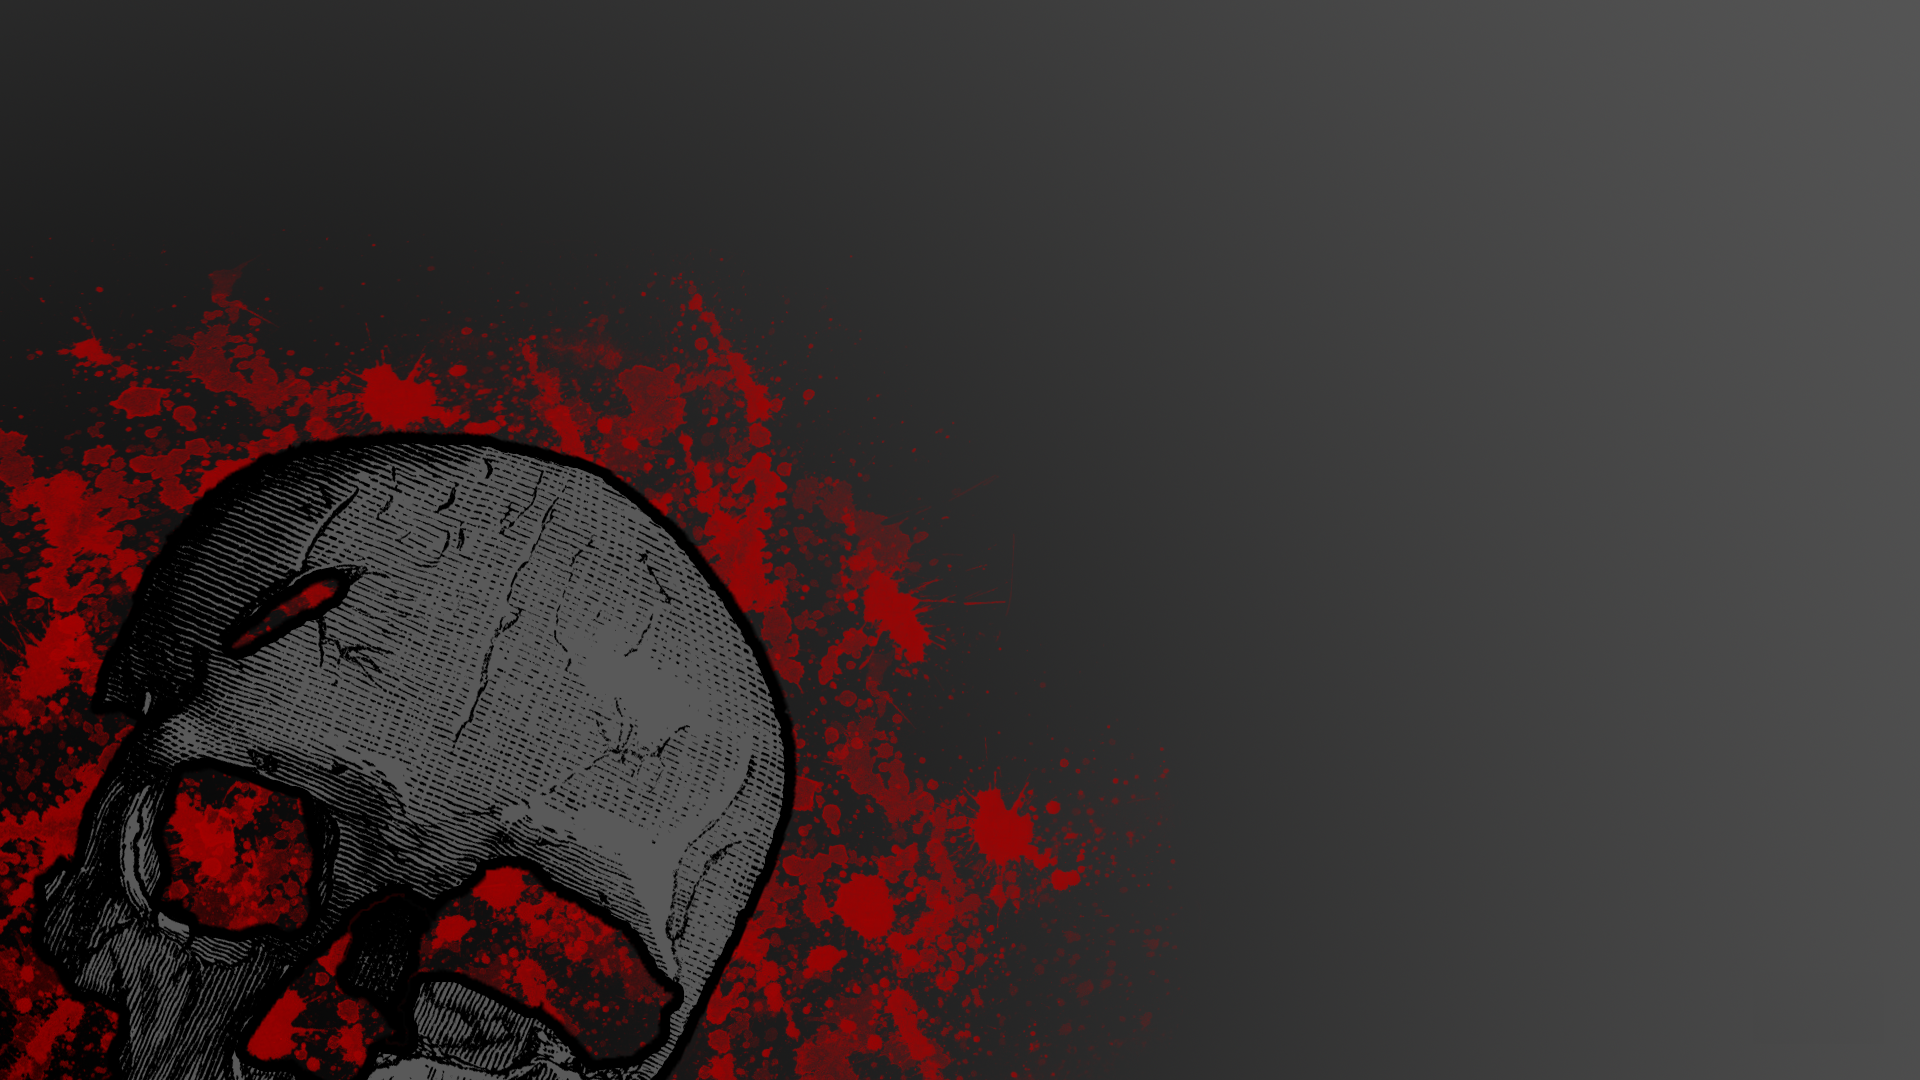 Fire Skull On A Gray Background Wallpaper And Image